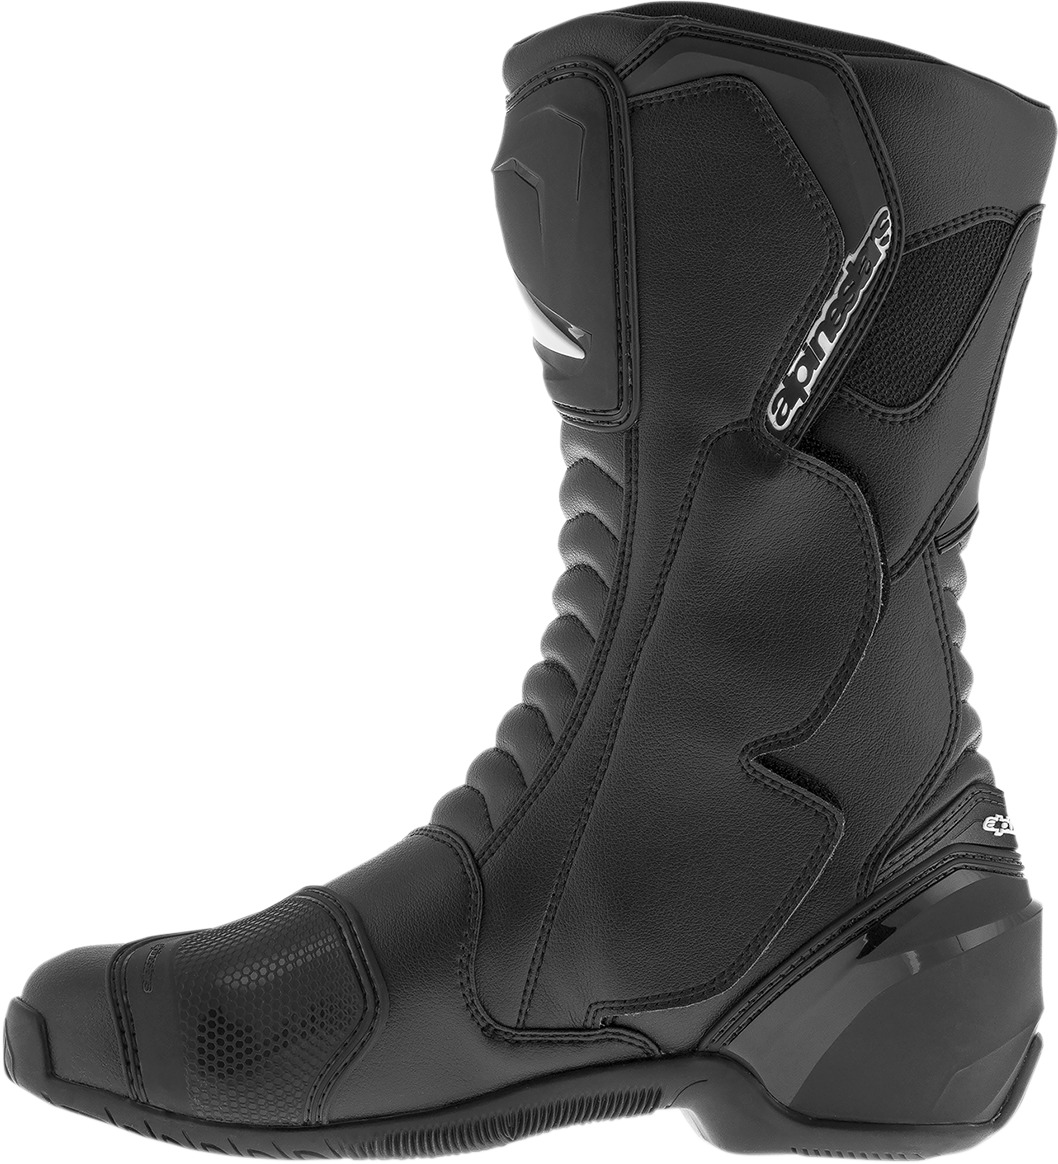 SMX-S Waterproof Street Riding Boots Black US 13.5 - Click Image to Close